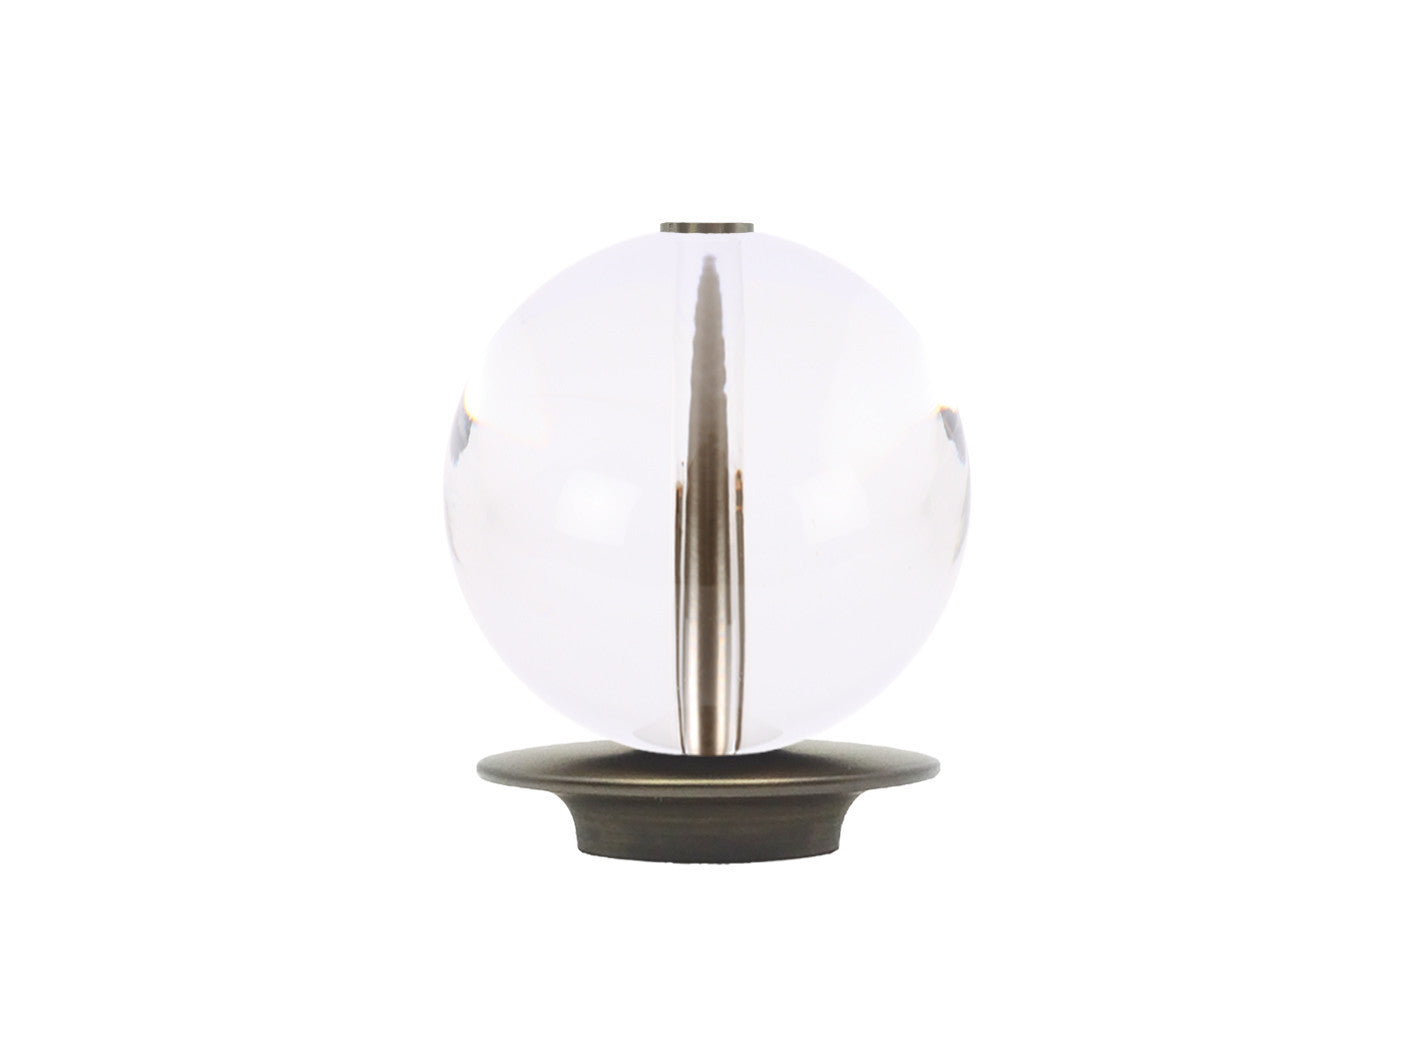 Acrylic ball finial for 30mm dia. curtain poles with brushed bronze adapter